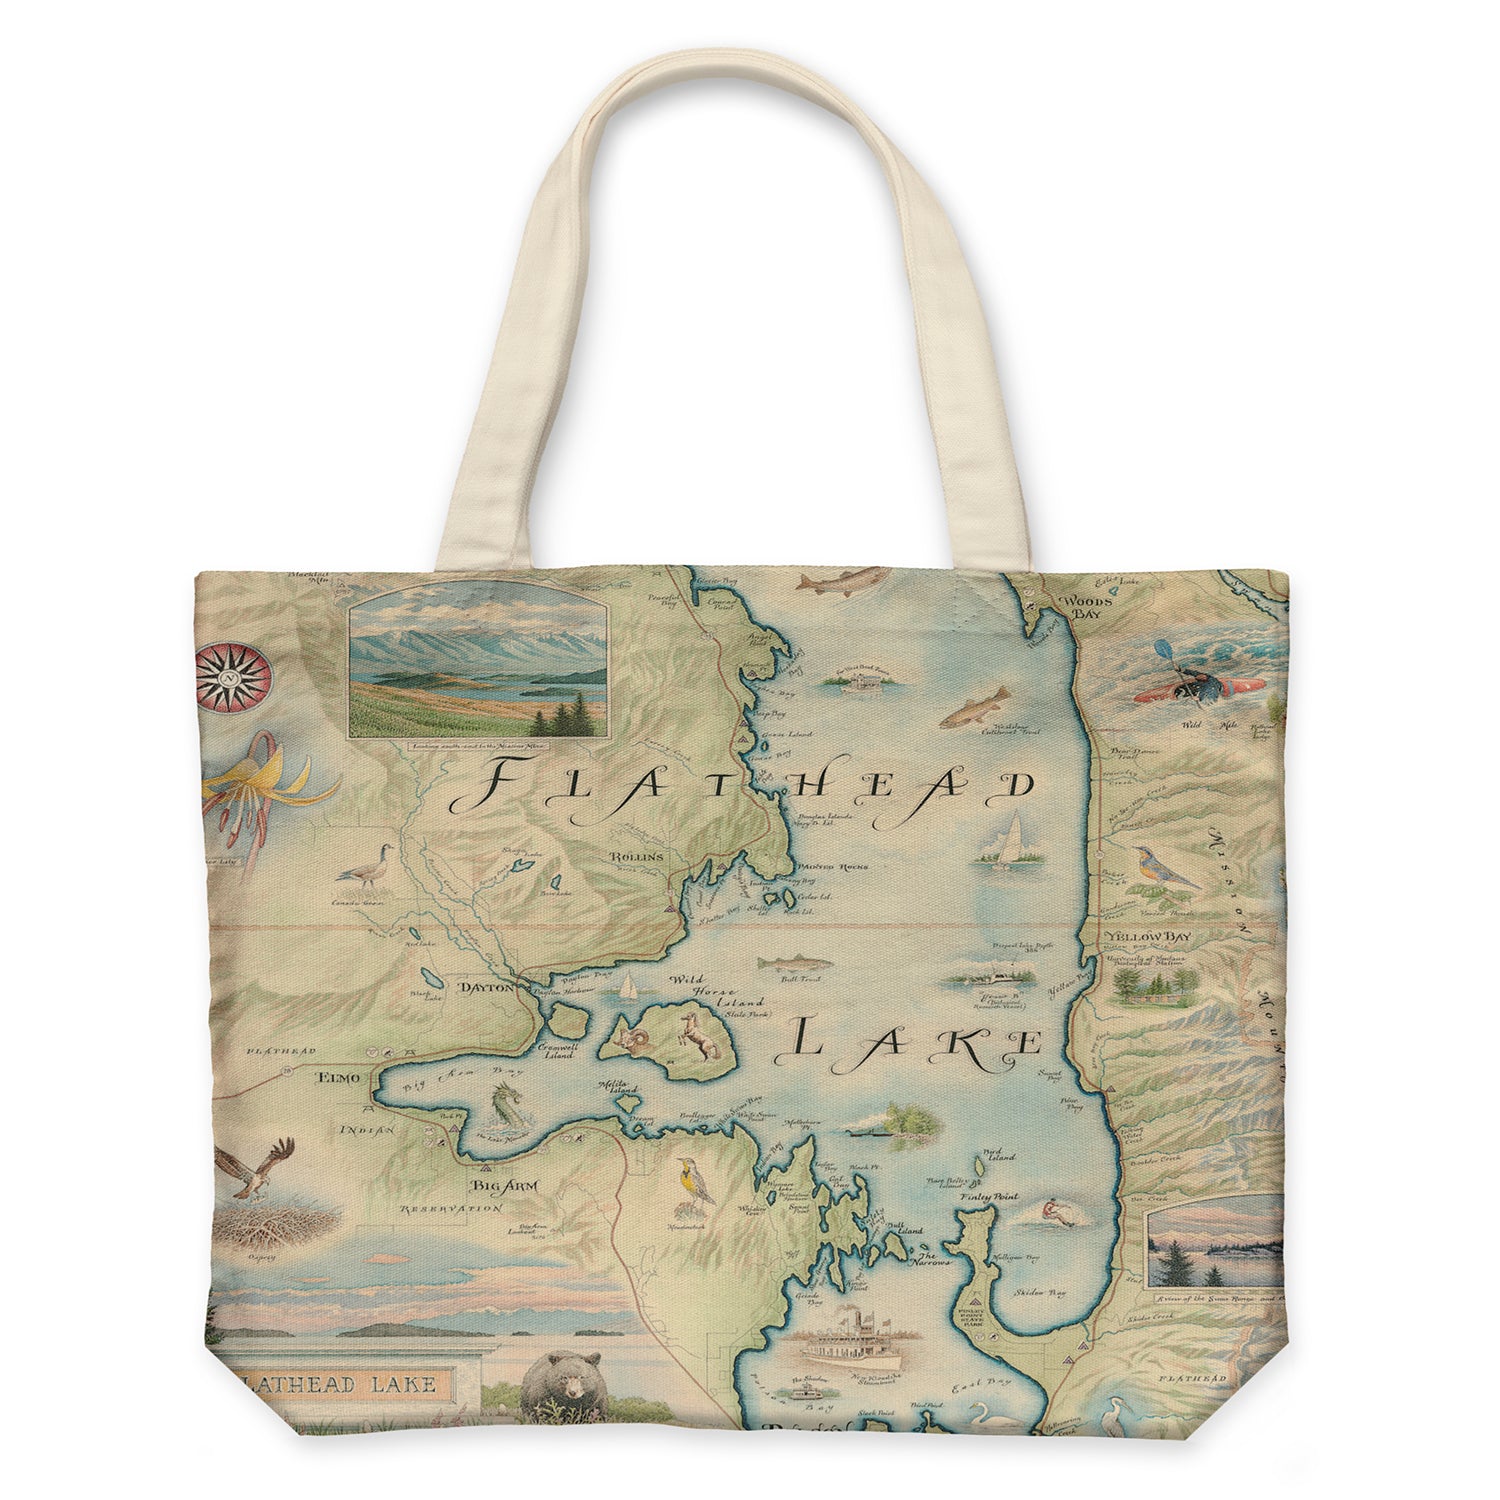 Flathead Lake Montana Map Canvas Tote Bags by Xplorer Maps. Features Golfing, Steamboat, Rafting, birds, eagles, Osprey, Bears, forest, water, deer, mountain lion, fish, Cherry Blossoms, and flowers like Glacier Lilies and Lady Slippers. Cities and landmarks are noted such as Woods Bay, Wild Horse Island, Finley Point, and Big Arm. 